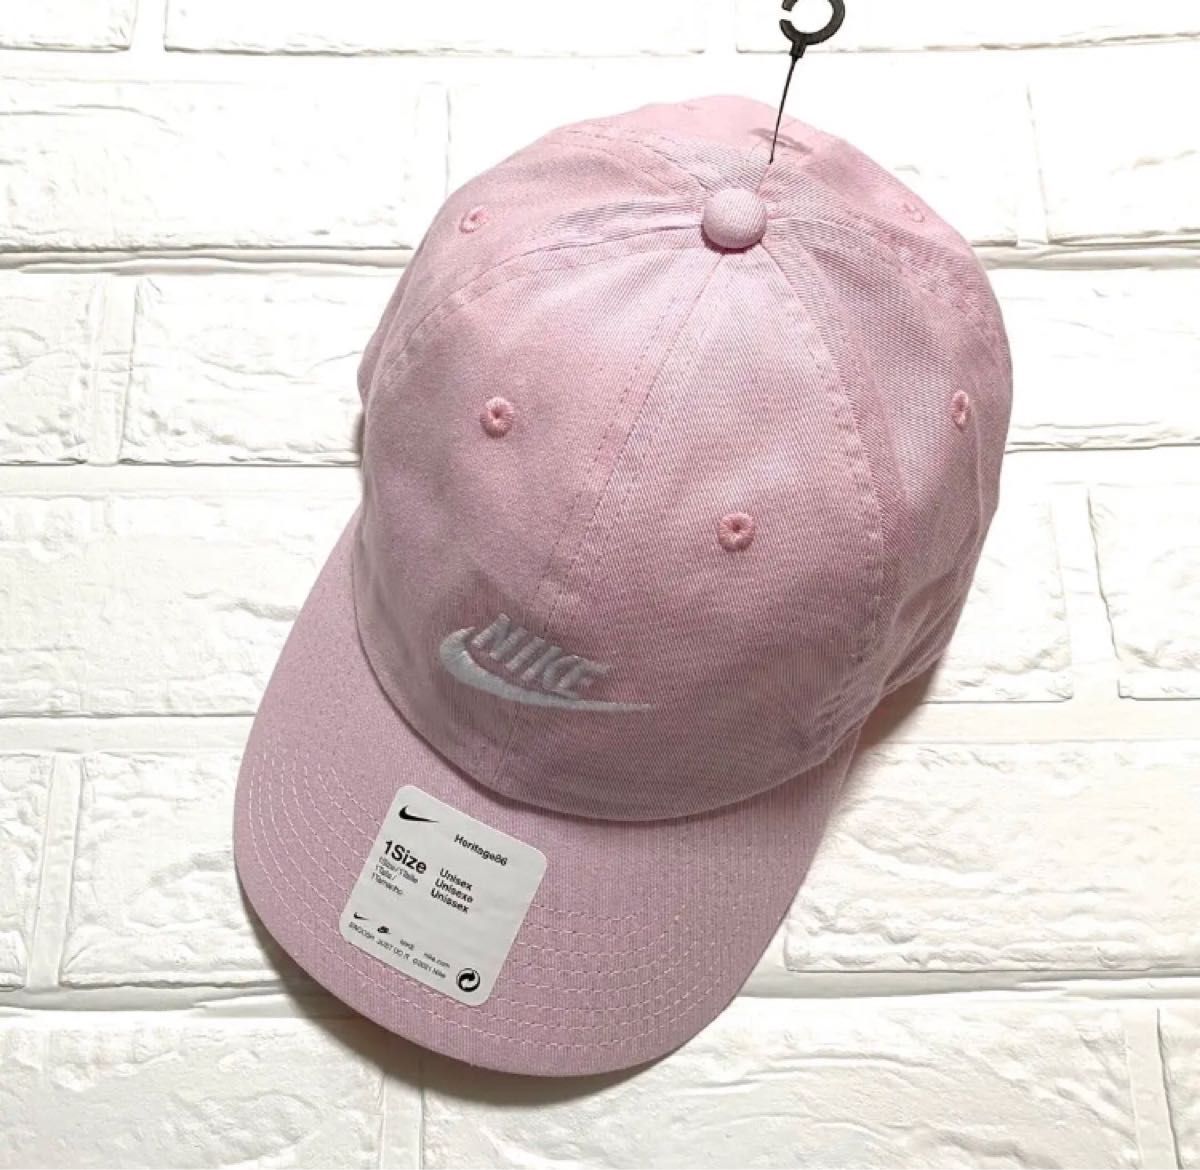 NIKE ナイキ H86 Futura Washed Cap キャップ新品タグ付｜PayPayフリマ